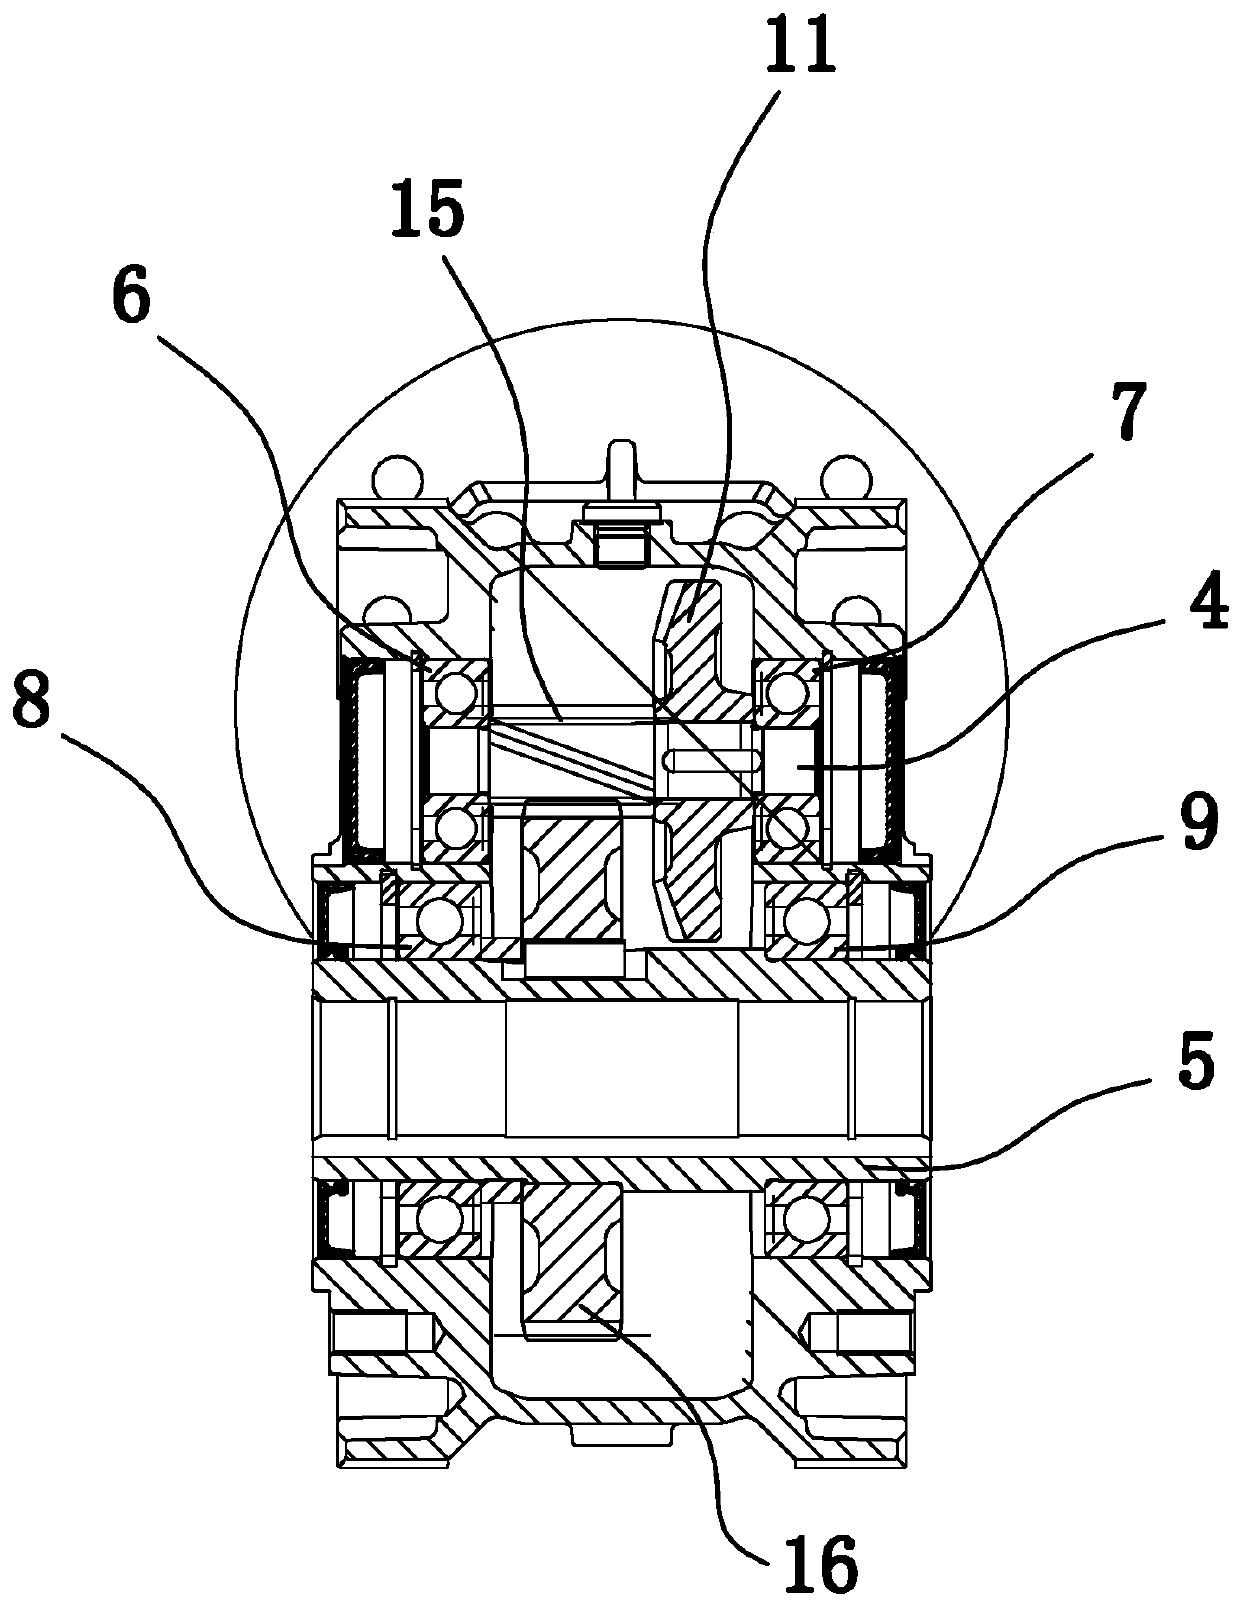 Speed reducer structure